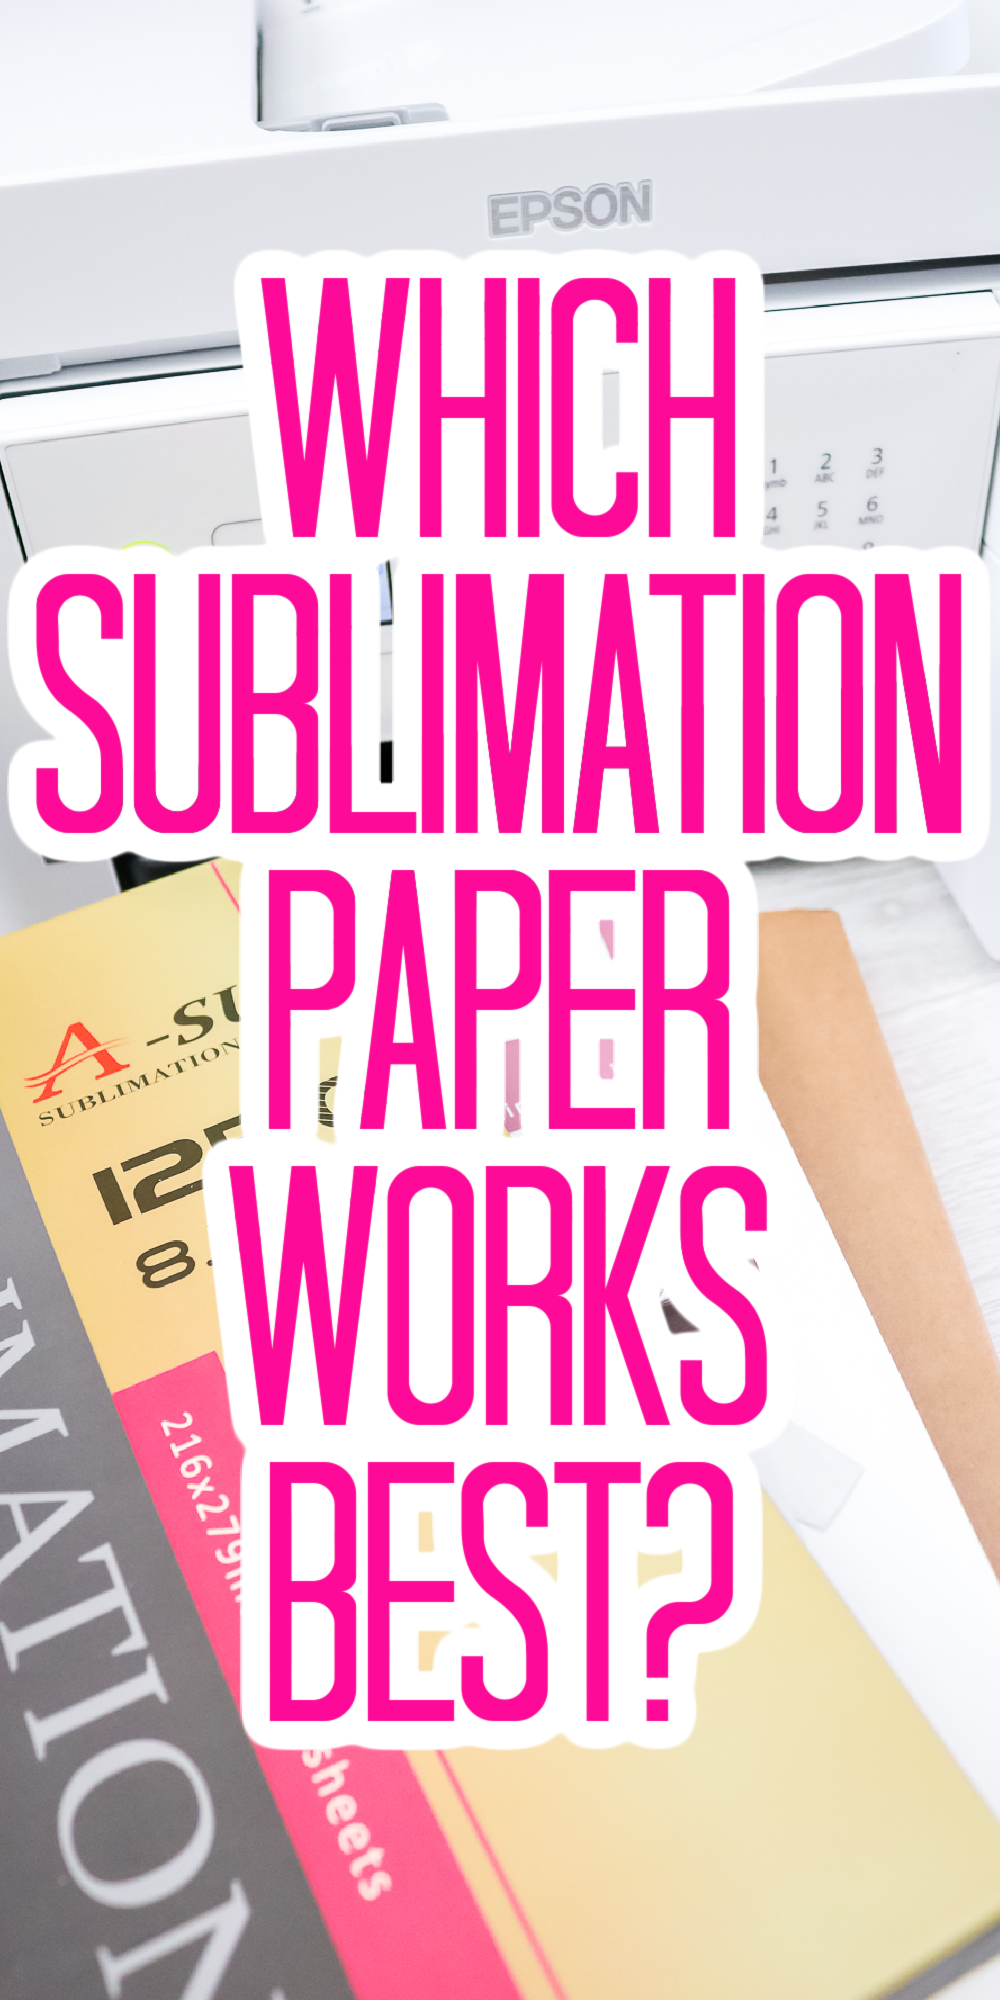 Sublimation Paper Versus Copy Paper: Which is Best? - Angie Holden